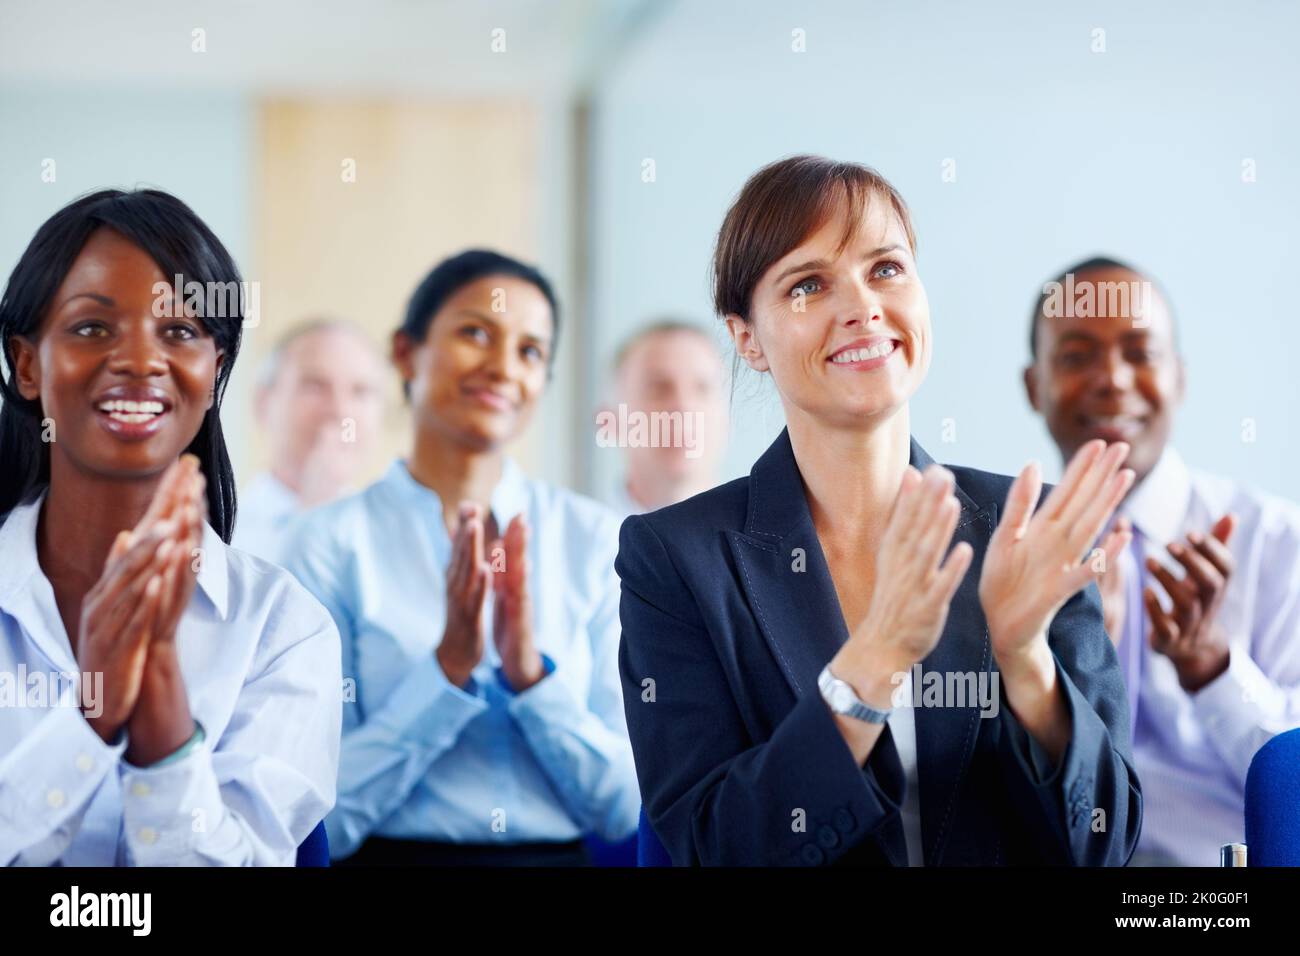 Colleagues applauding presentation. View of group of executives applauding. Stock Photo